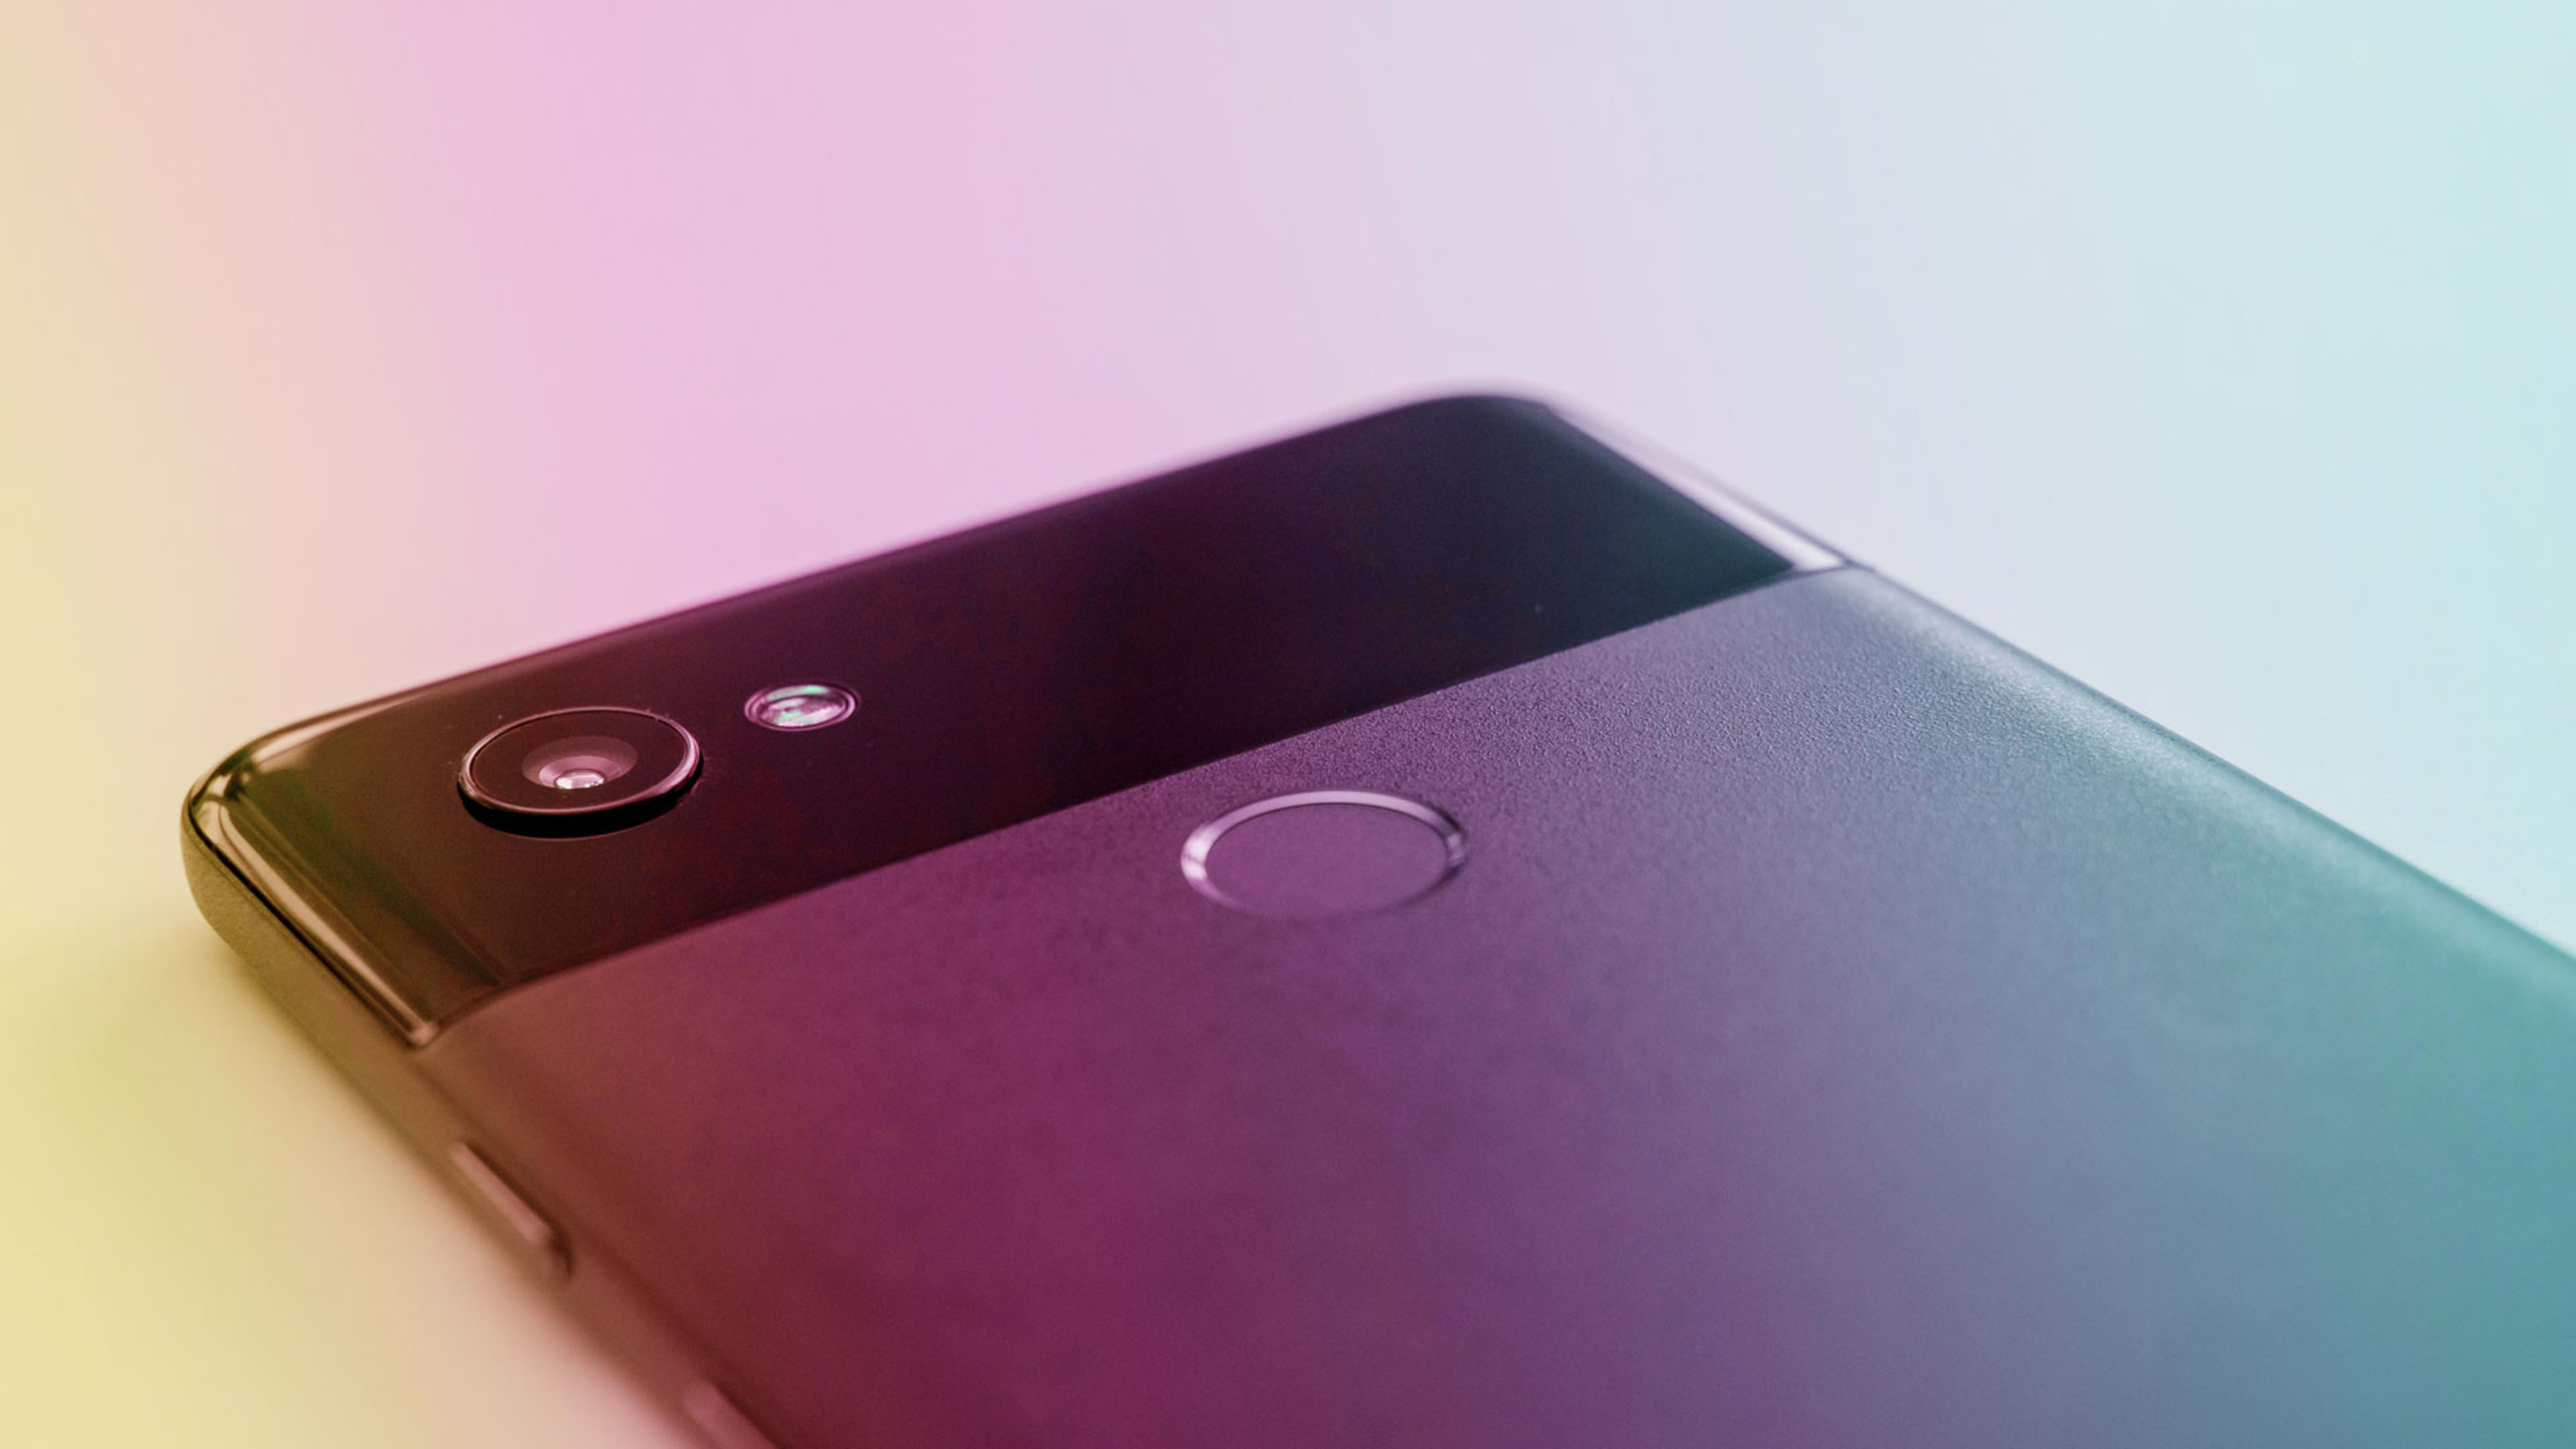 Original Pixel phone users are suing Google over microphone defects